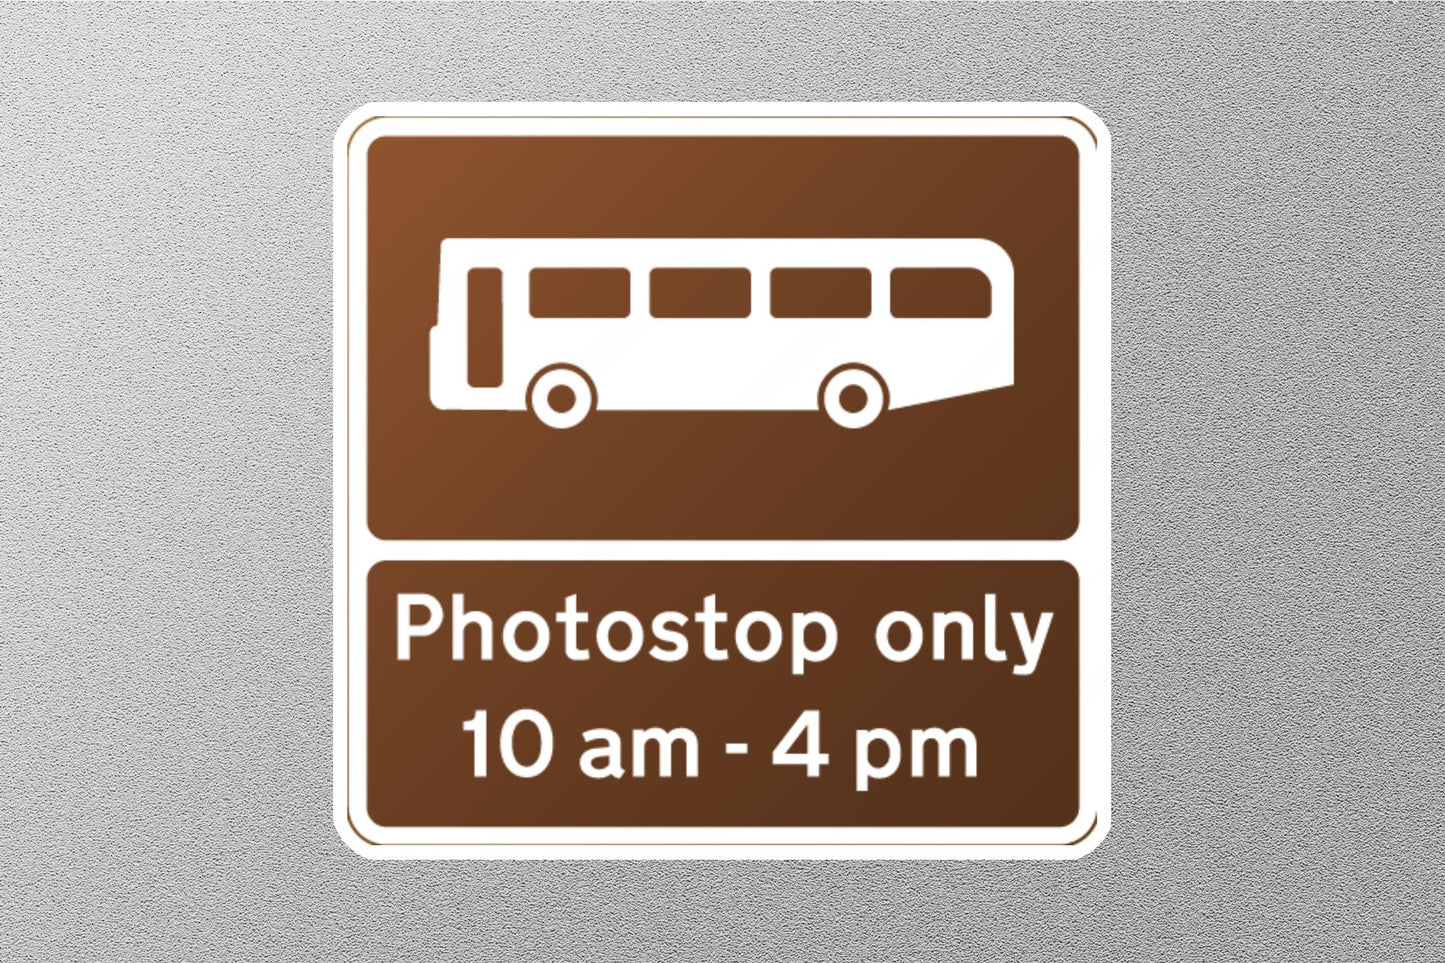 Bus Stop Photoshop Only UK Sign Sticker